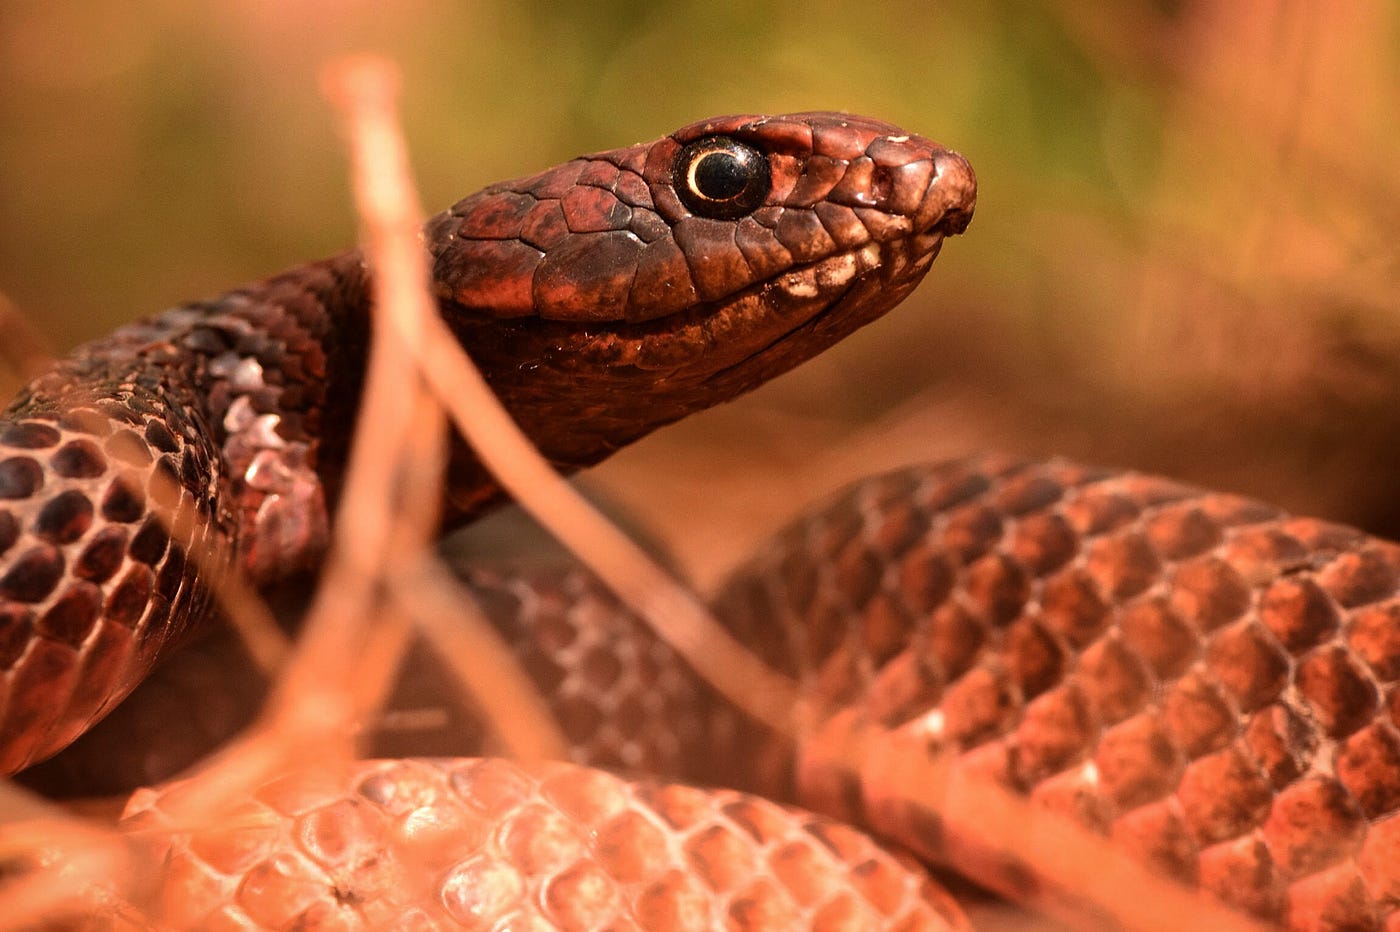 Fact check: Swimming method an unreliable indicator of venomous snakes